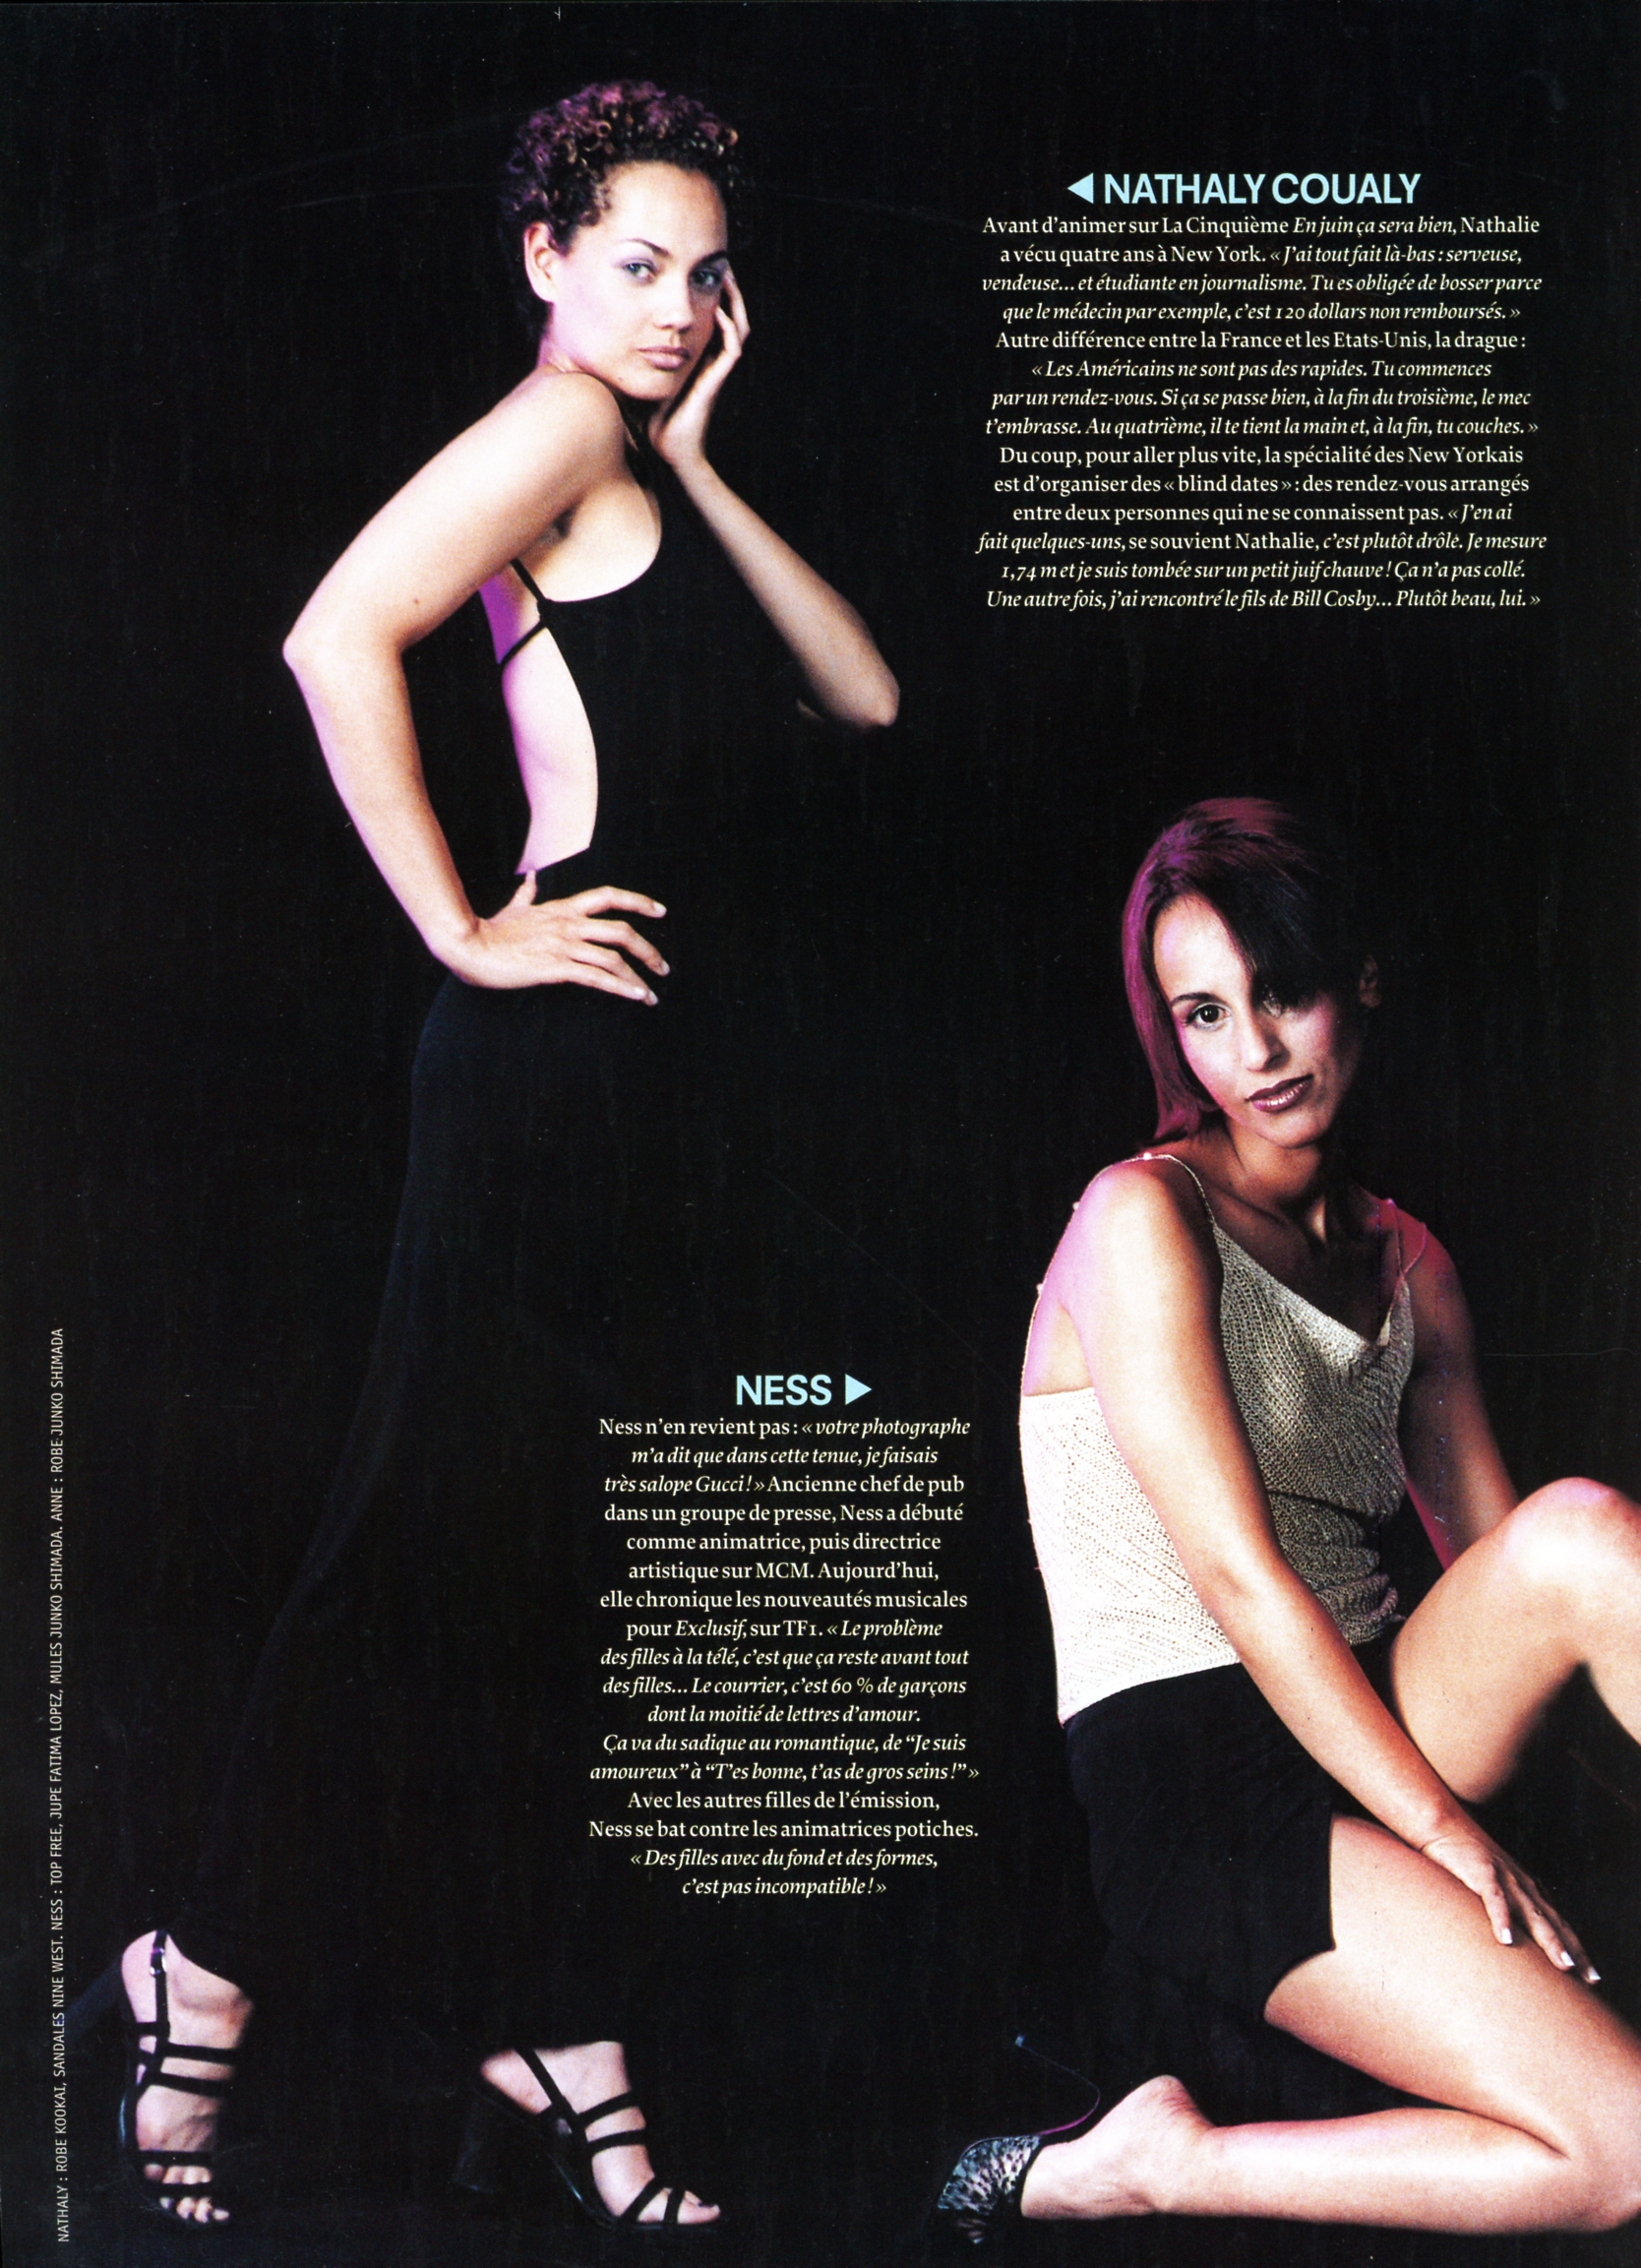 FHM French 1999 N002 = P13 Nathalie Coualy Ness.jpg